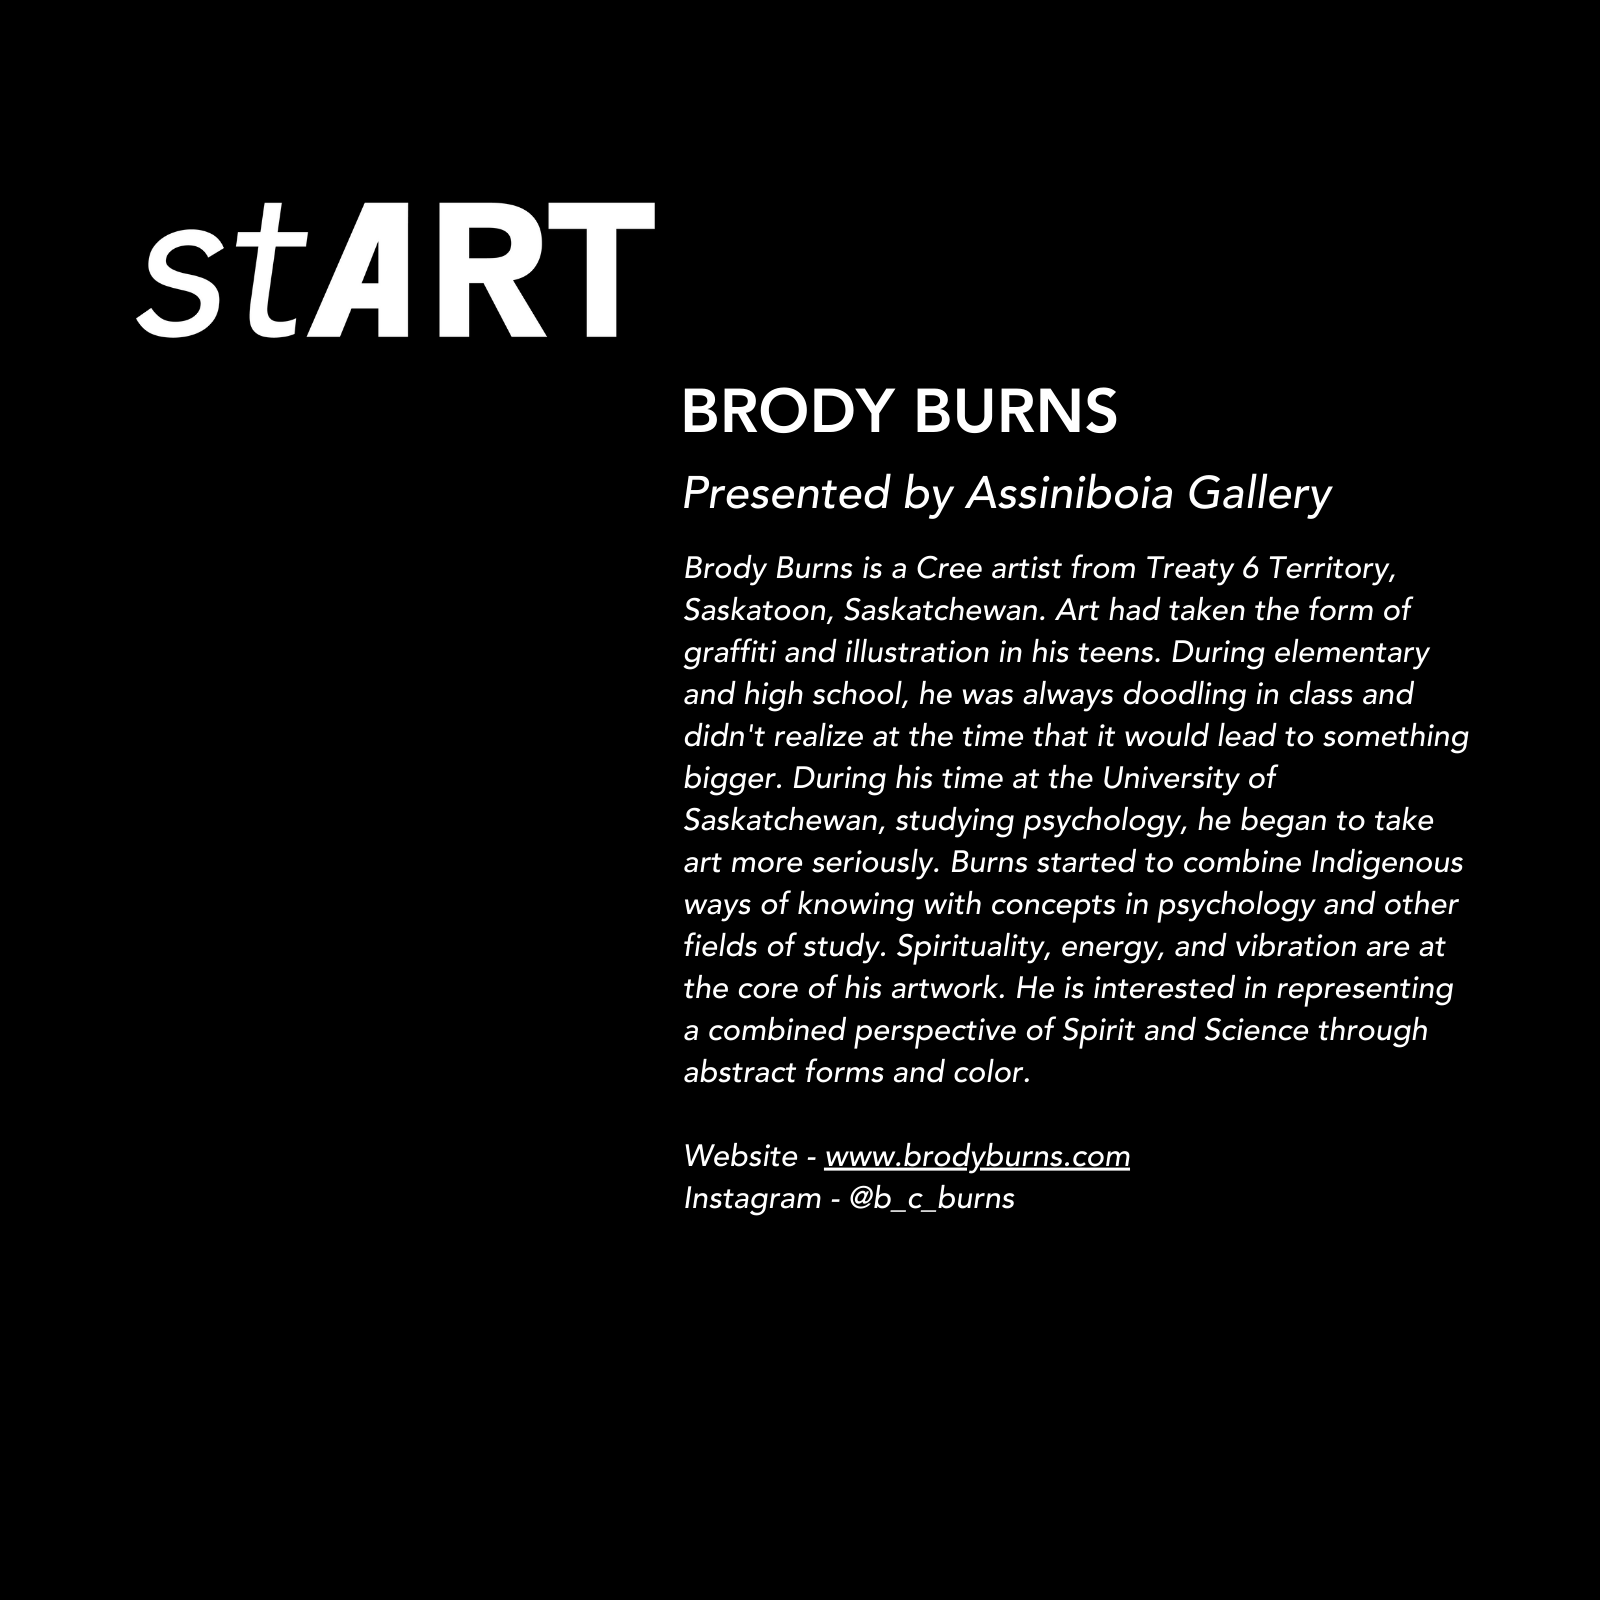 stART: Brody Burns, presented by Assiniboia Gallery